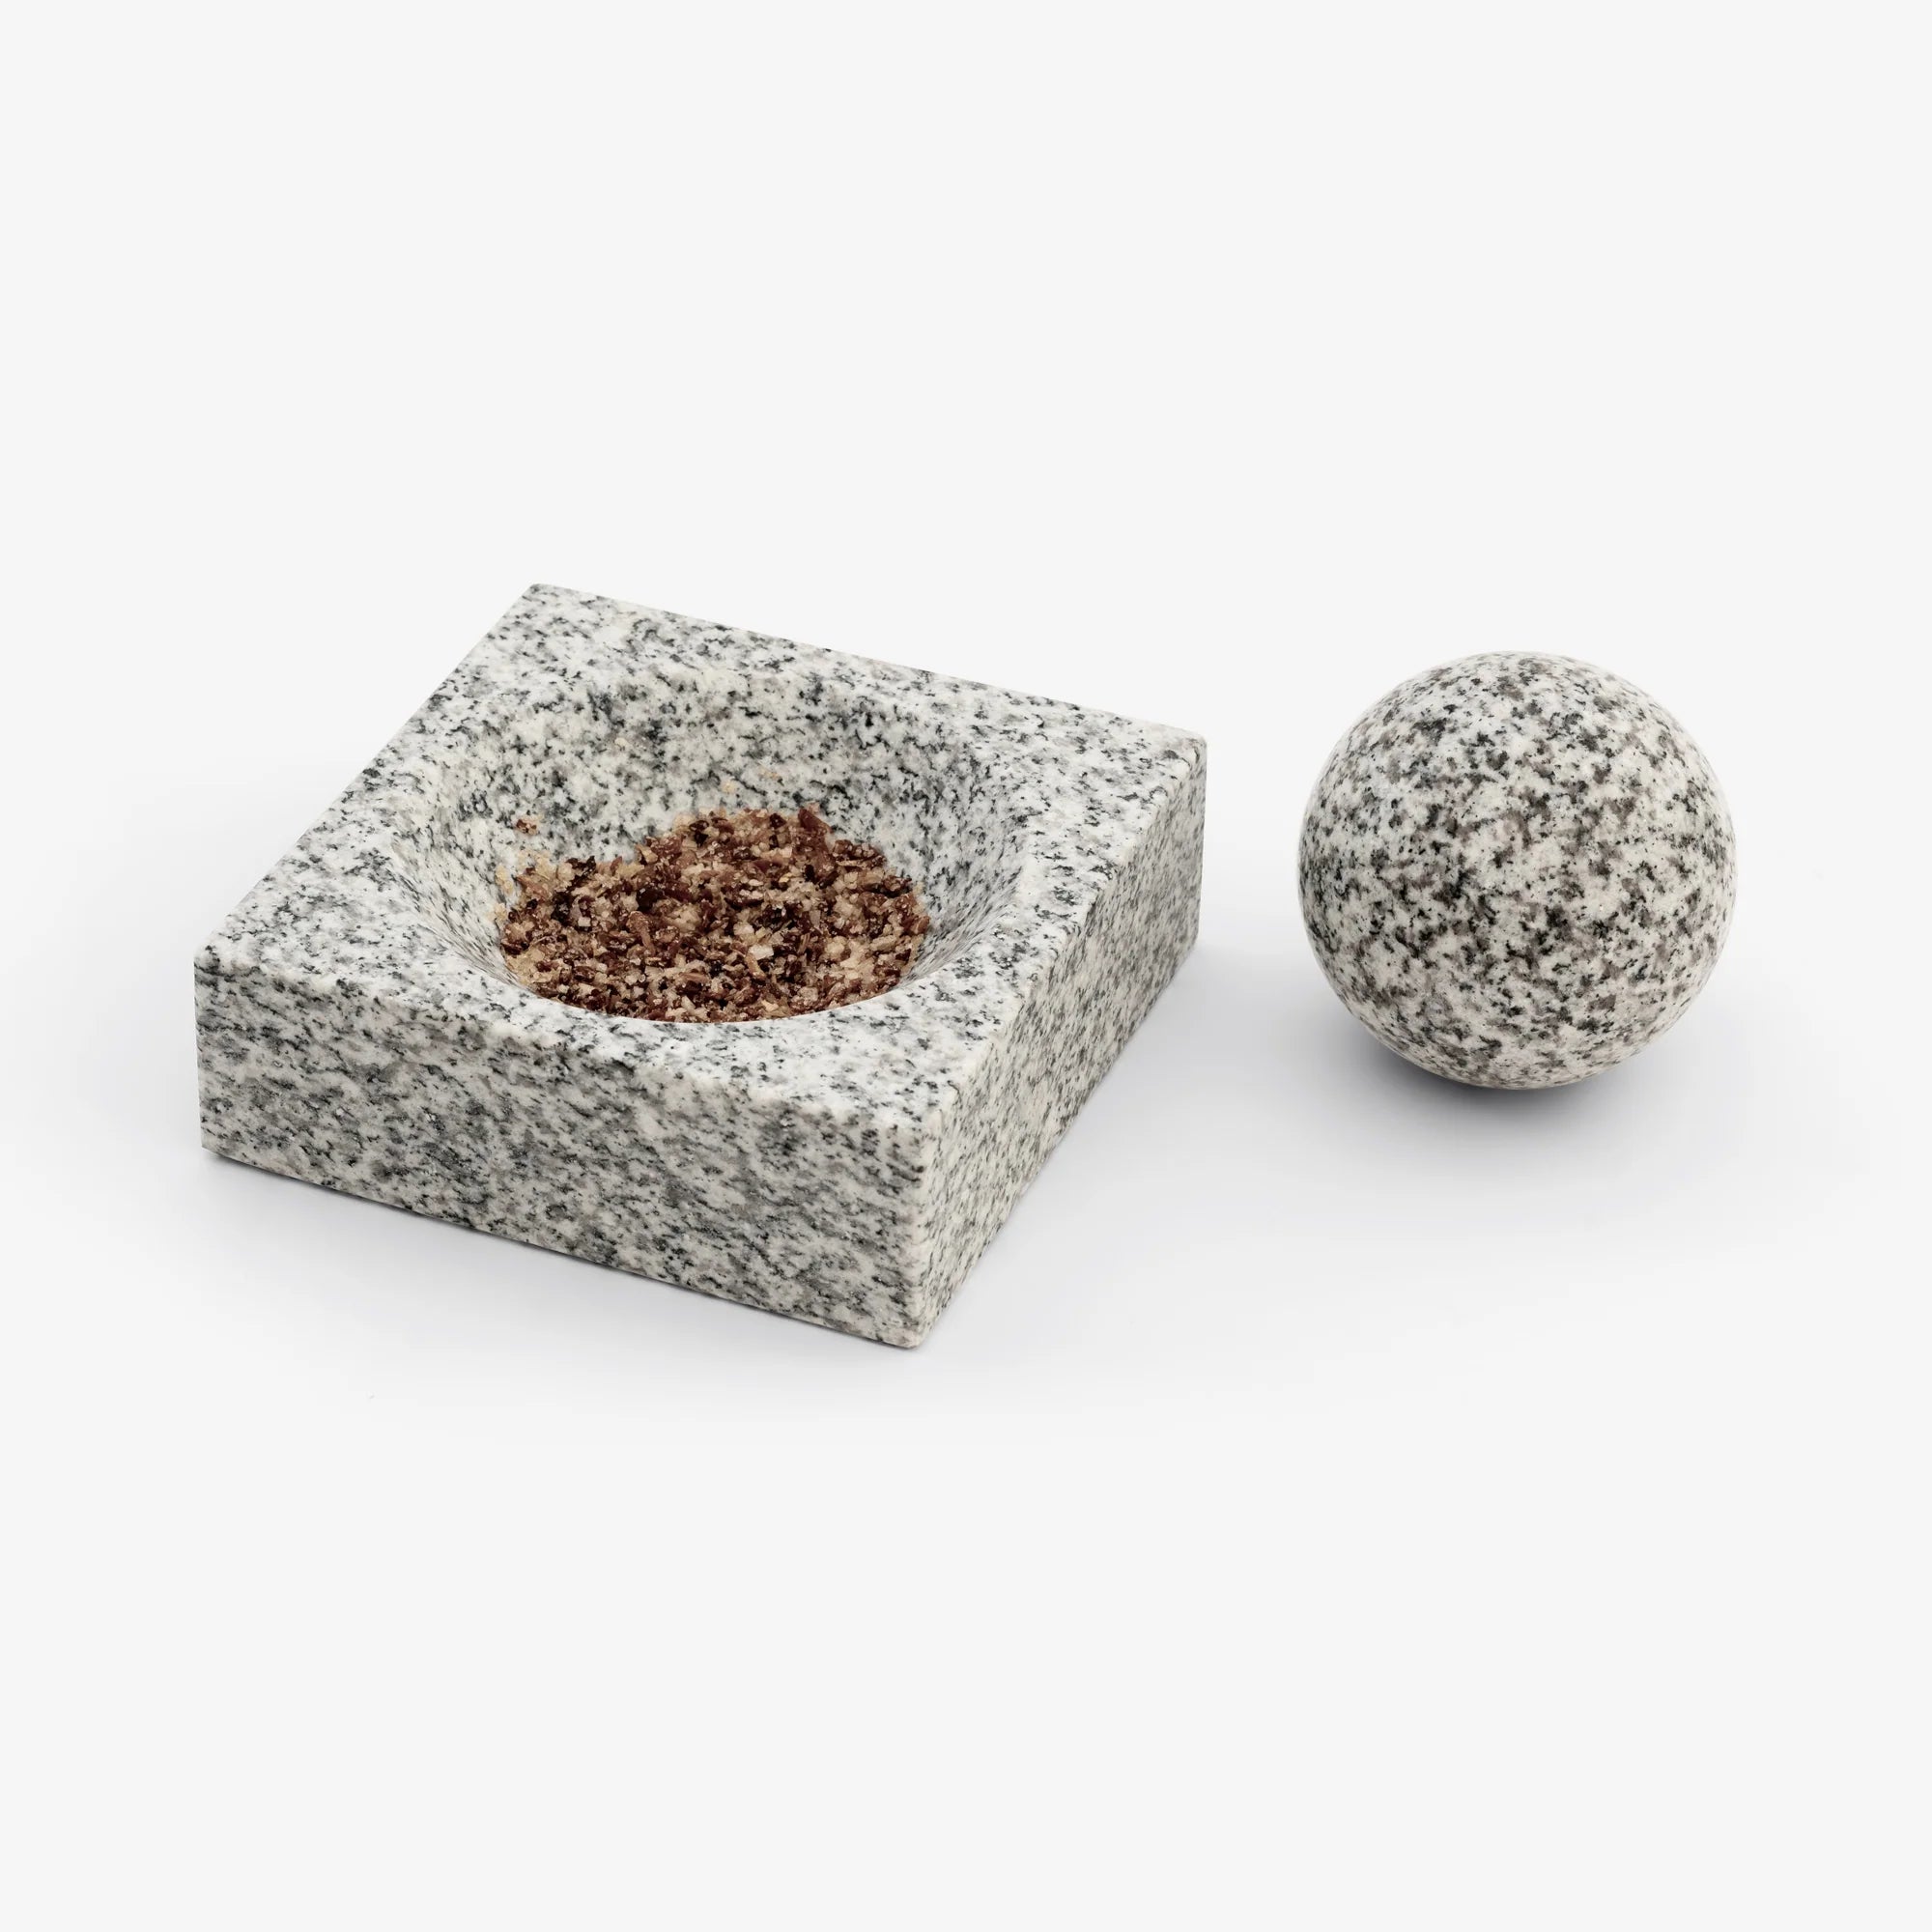 Orb Pestle and Mortar - THAT COOL LIVING